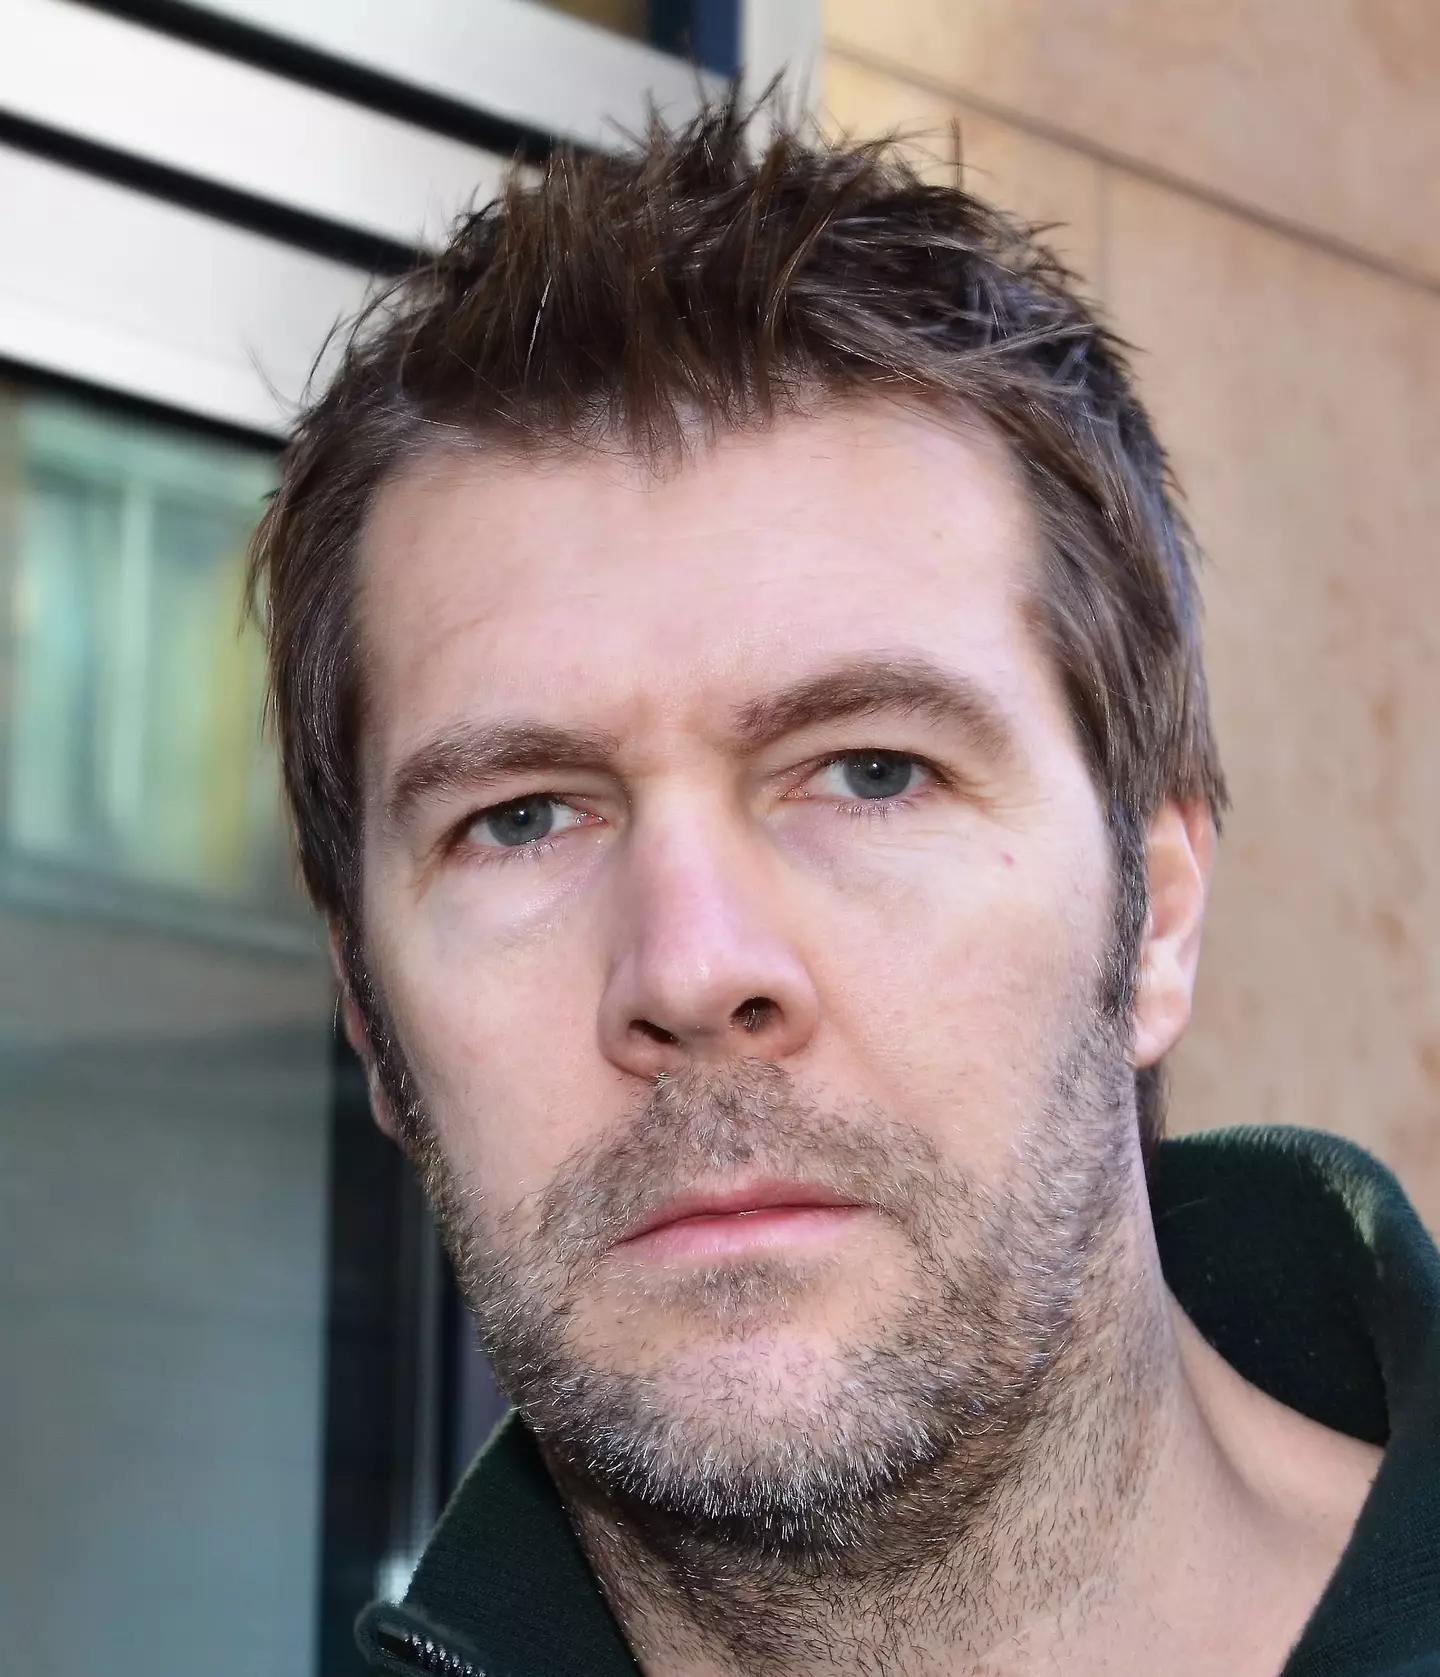 Rhod Gilbert was diagnosed with cancer in July this year.